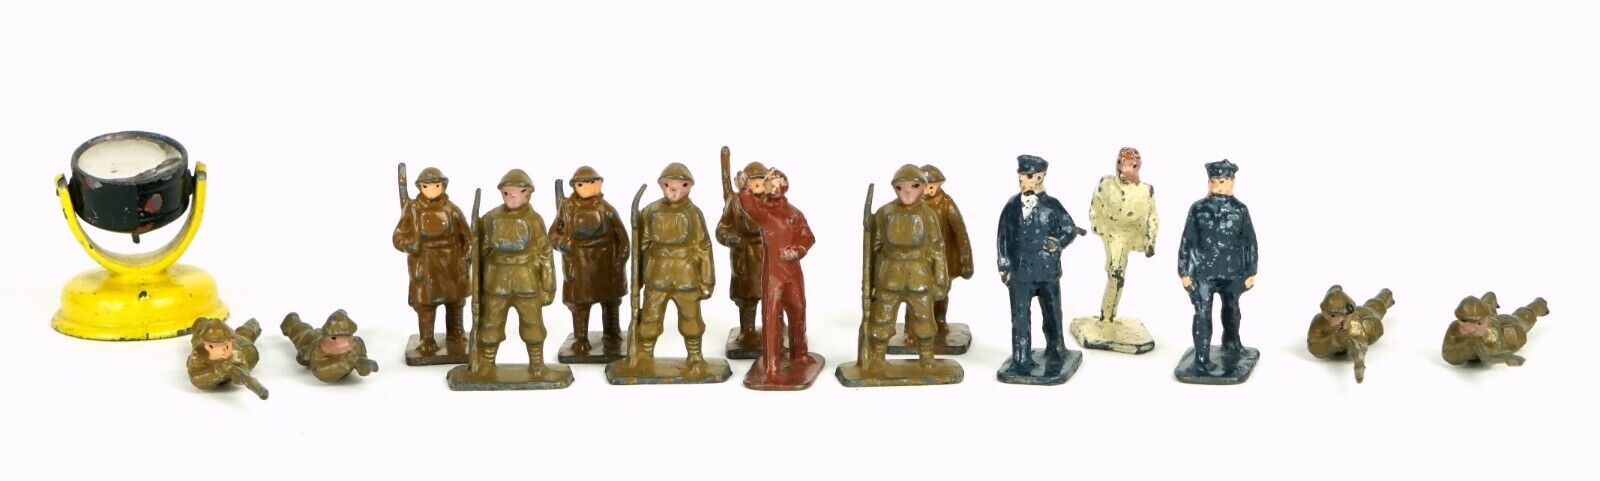 SKYBIRDS SCALE MODELS - PRE-WAR BRITISH ARMY MILITARY SEARCHLIGHT SOLDIER FIGURES